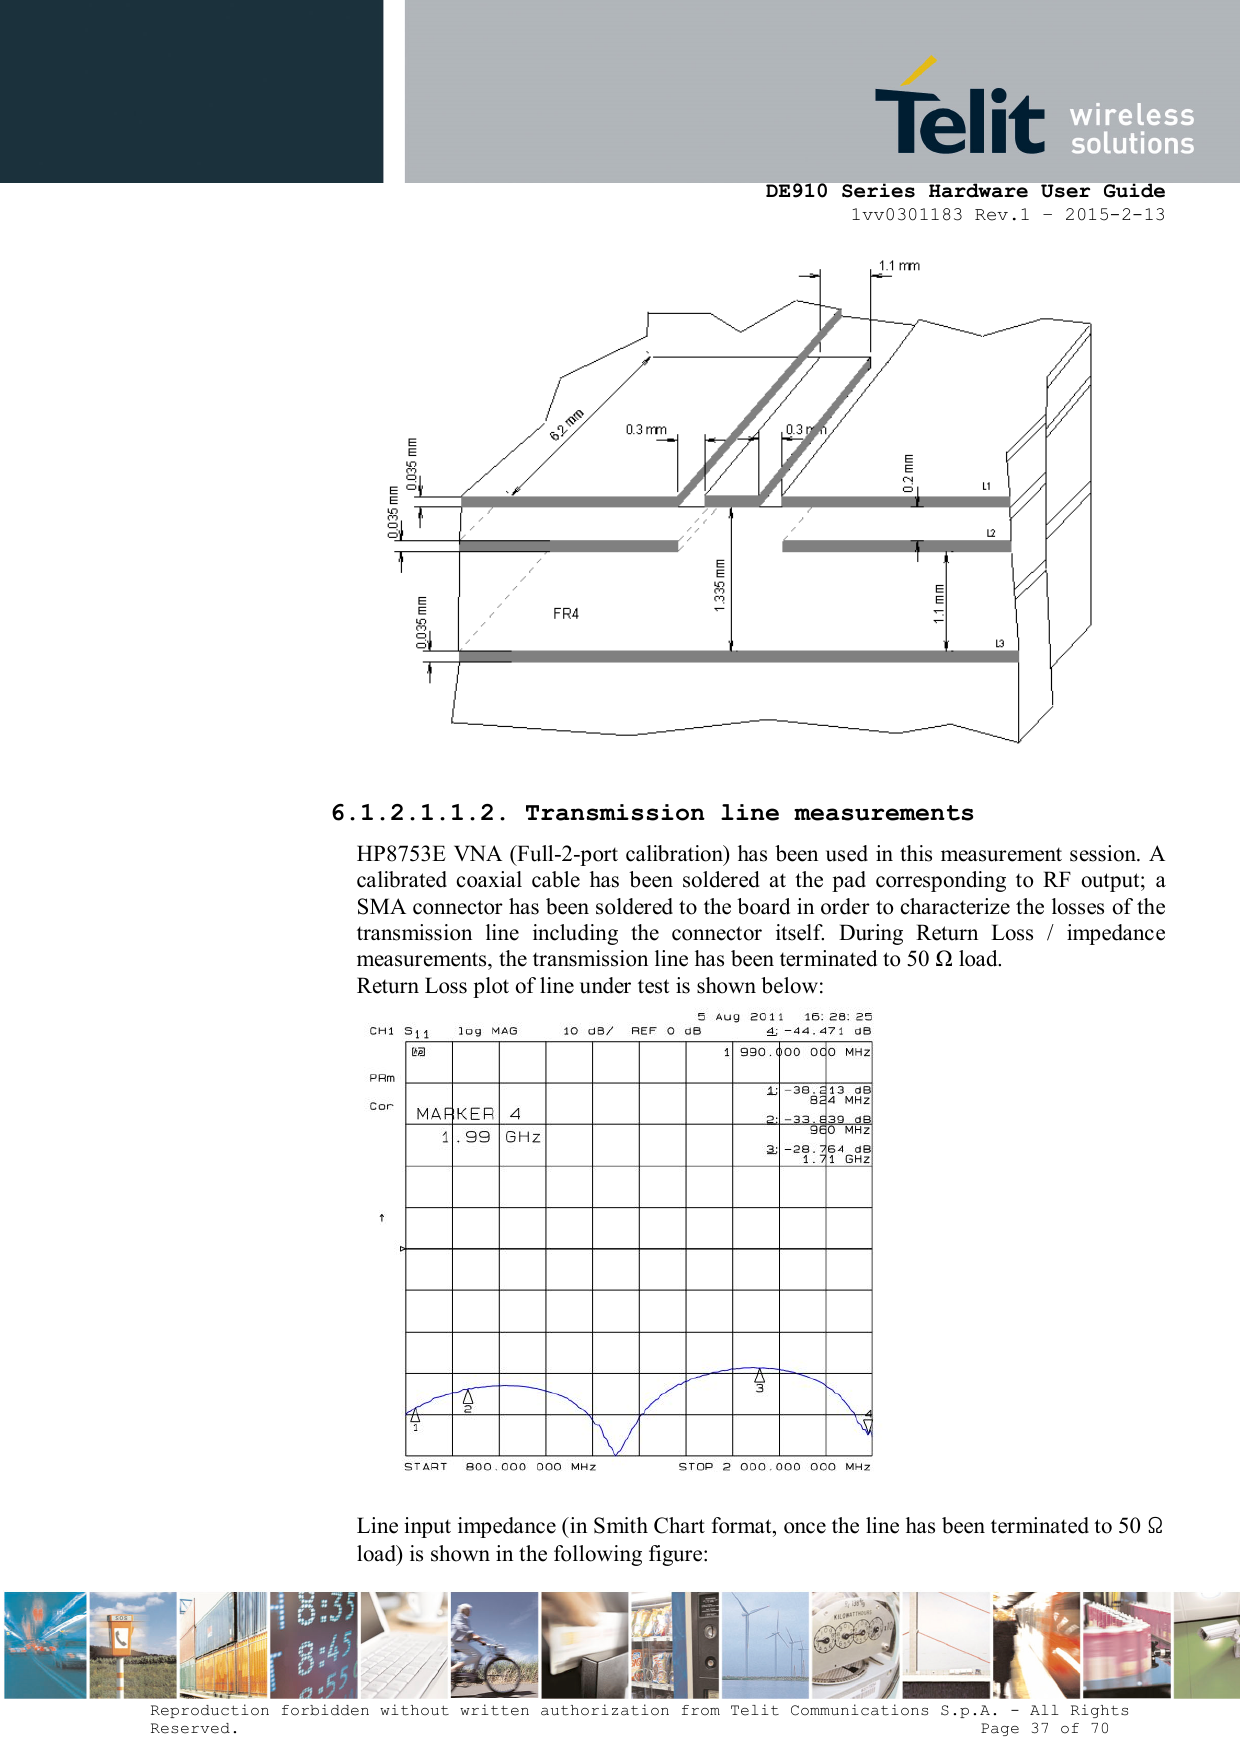      DE910 Series Hardware User Guide 1vv0301183 Rev.1 – 2015-2-13 Reproduction forbidden without written authorization from Telit Communications S.p.A. - All Rights Reserved.                                                                          Page 37 of 70   6.1.2.1.1.2. Transmission line measurements HP8753E VNA (Full-2-port calibration) has been used in this measurement session. A calibrated  coaxial  cable  has  been  soldered  at  the  pad  corresponding  to  RF  output;  a SMA connector has been soldered to the board in order to characterize the losses of the transmission  line  including  the  connector  itself.  During  Return  Loss  /  impedance measurements, the transmission line has been terminated to 50 Ω load.  Return Loss plot of line under test is shown below:   Line input impedance (in Smith Chart format, once the line has been terminated to 50 Ω load) is shown in the following figure: 